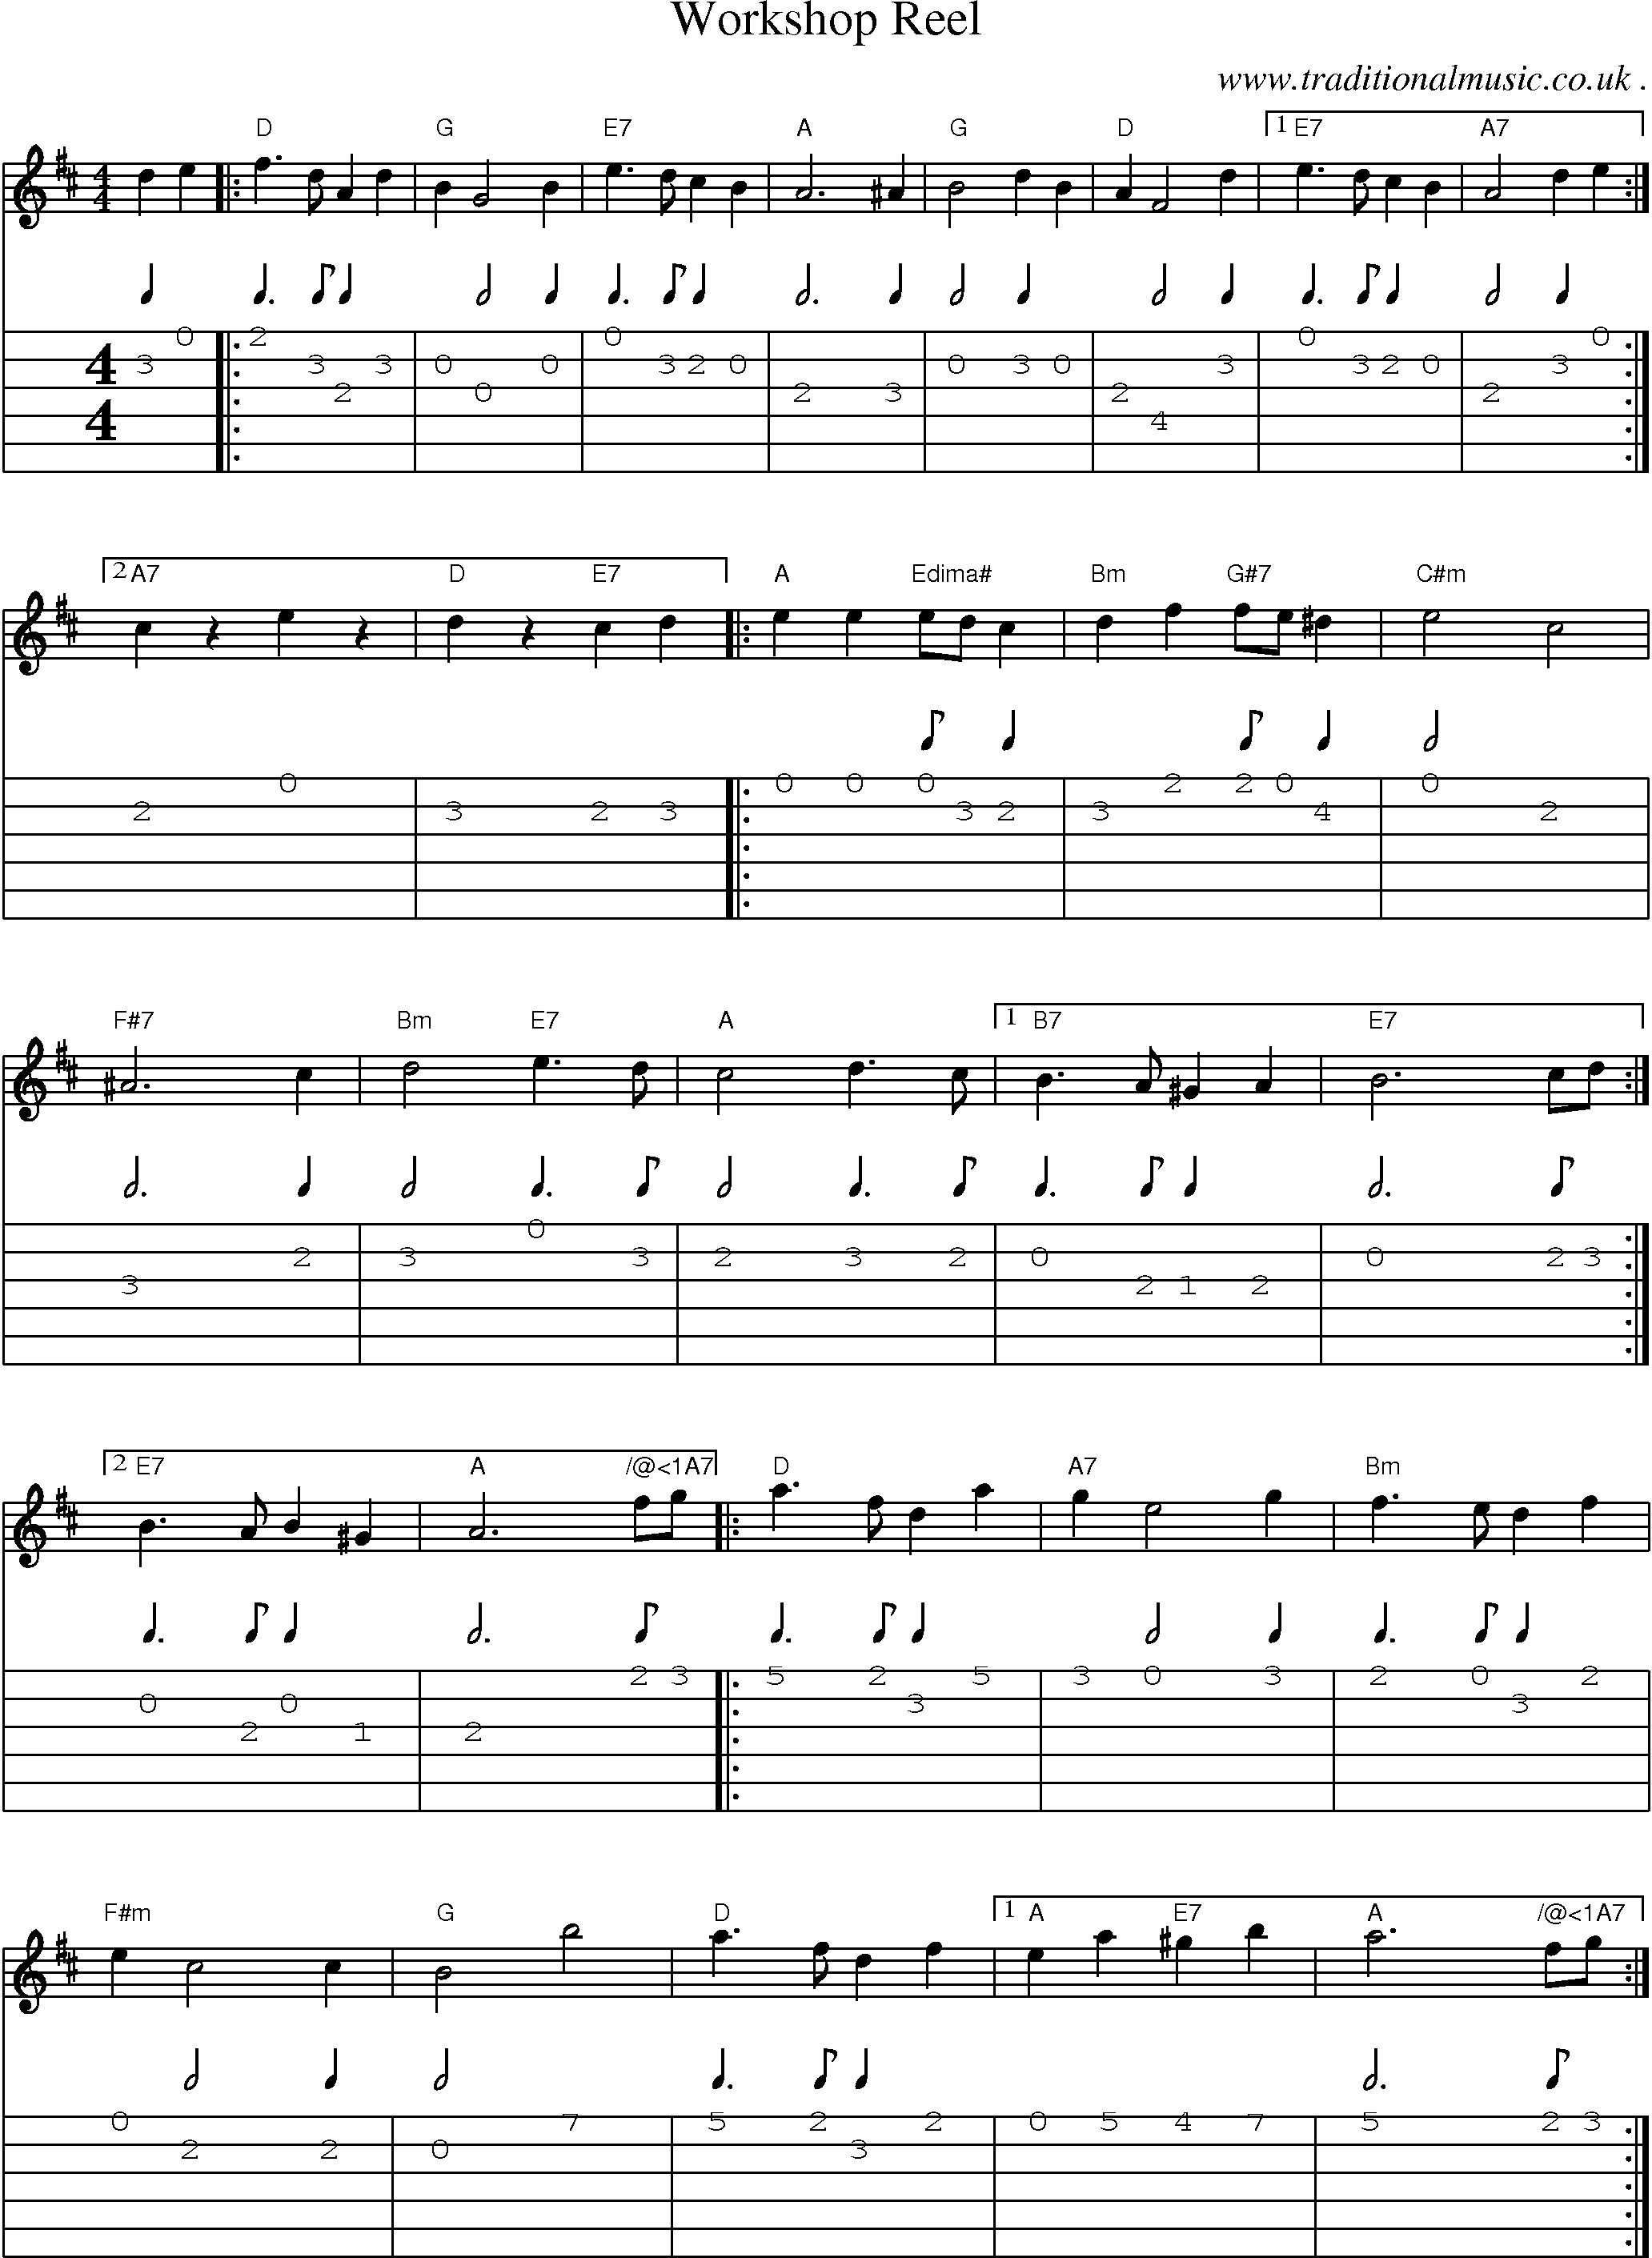 Sheet-Music and Guitar Tabs for Workshop Reel